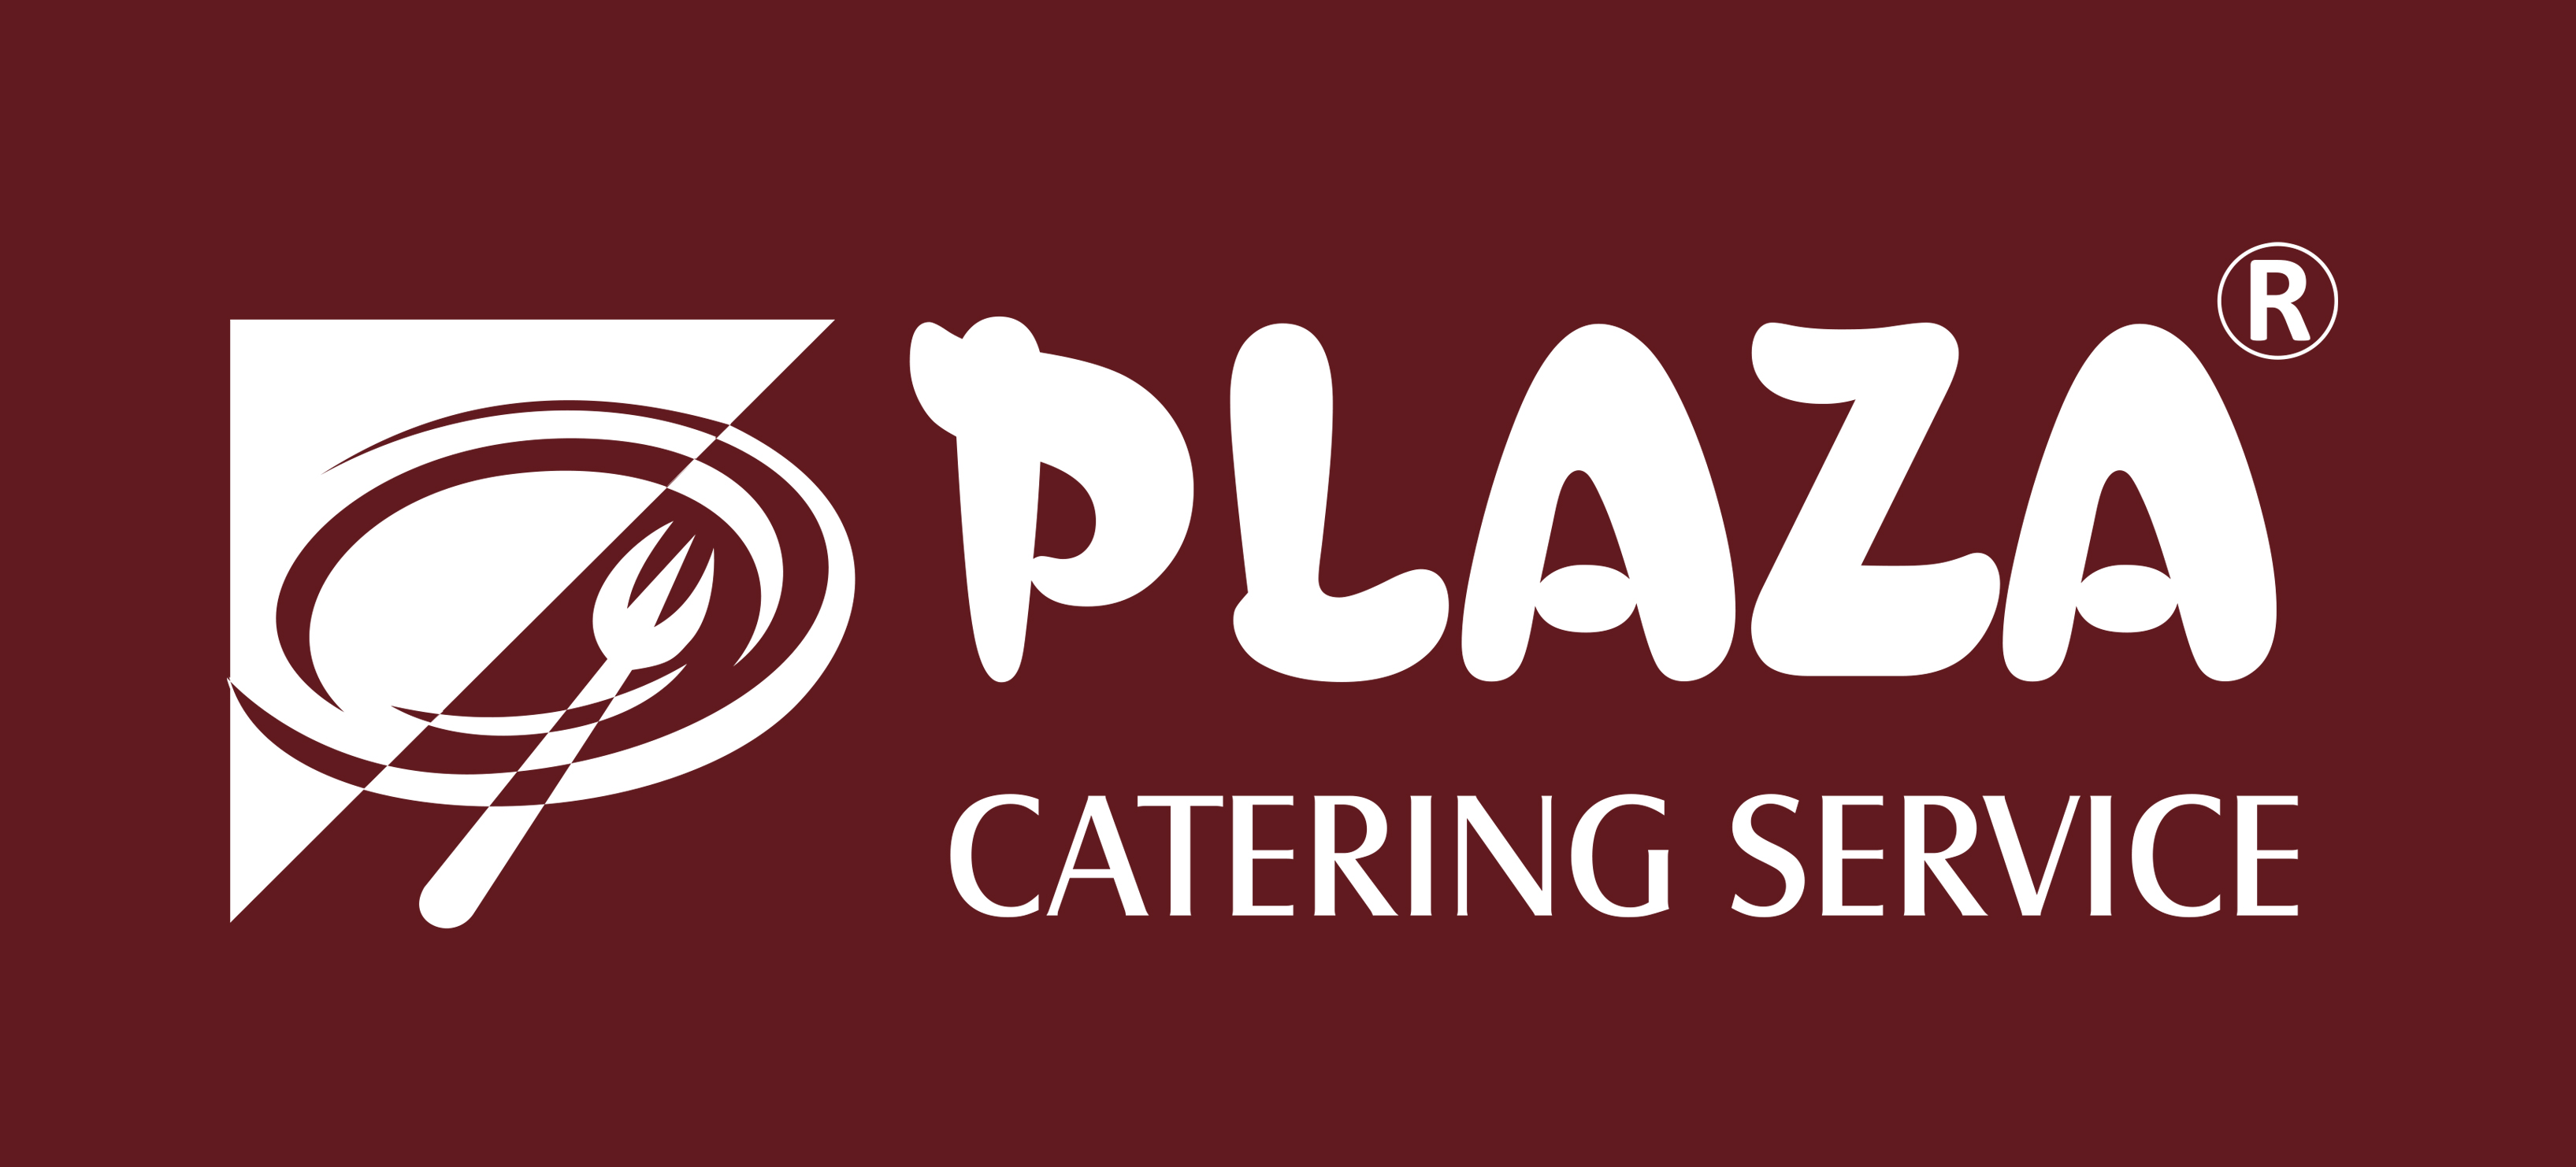 Plaza Catering|Banquet Halls|Event Services